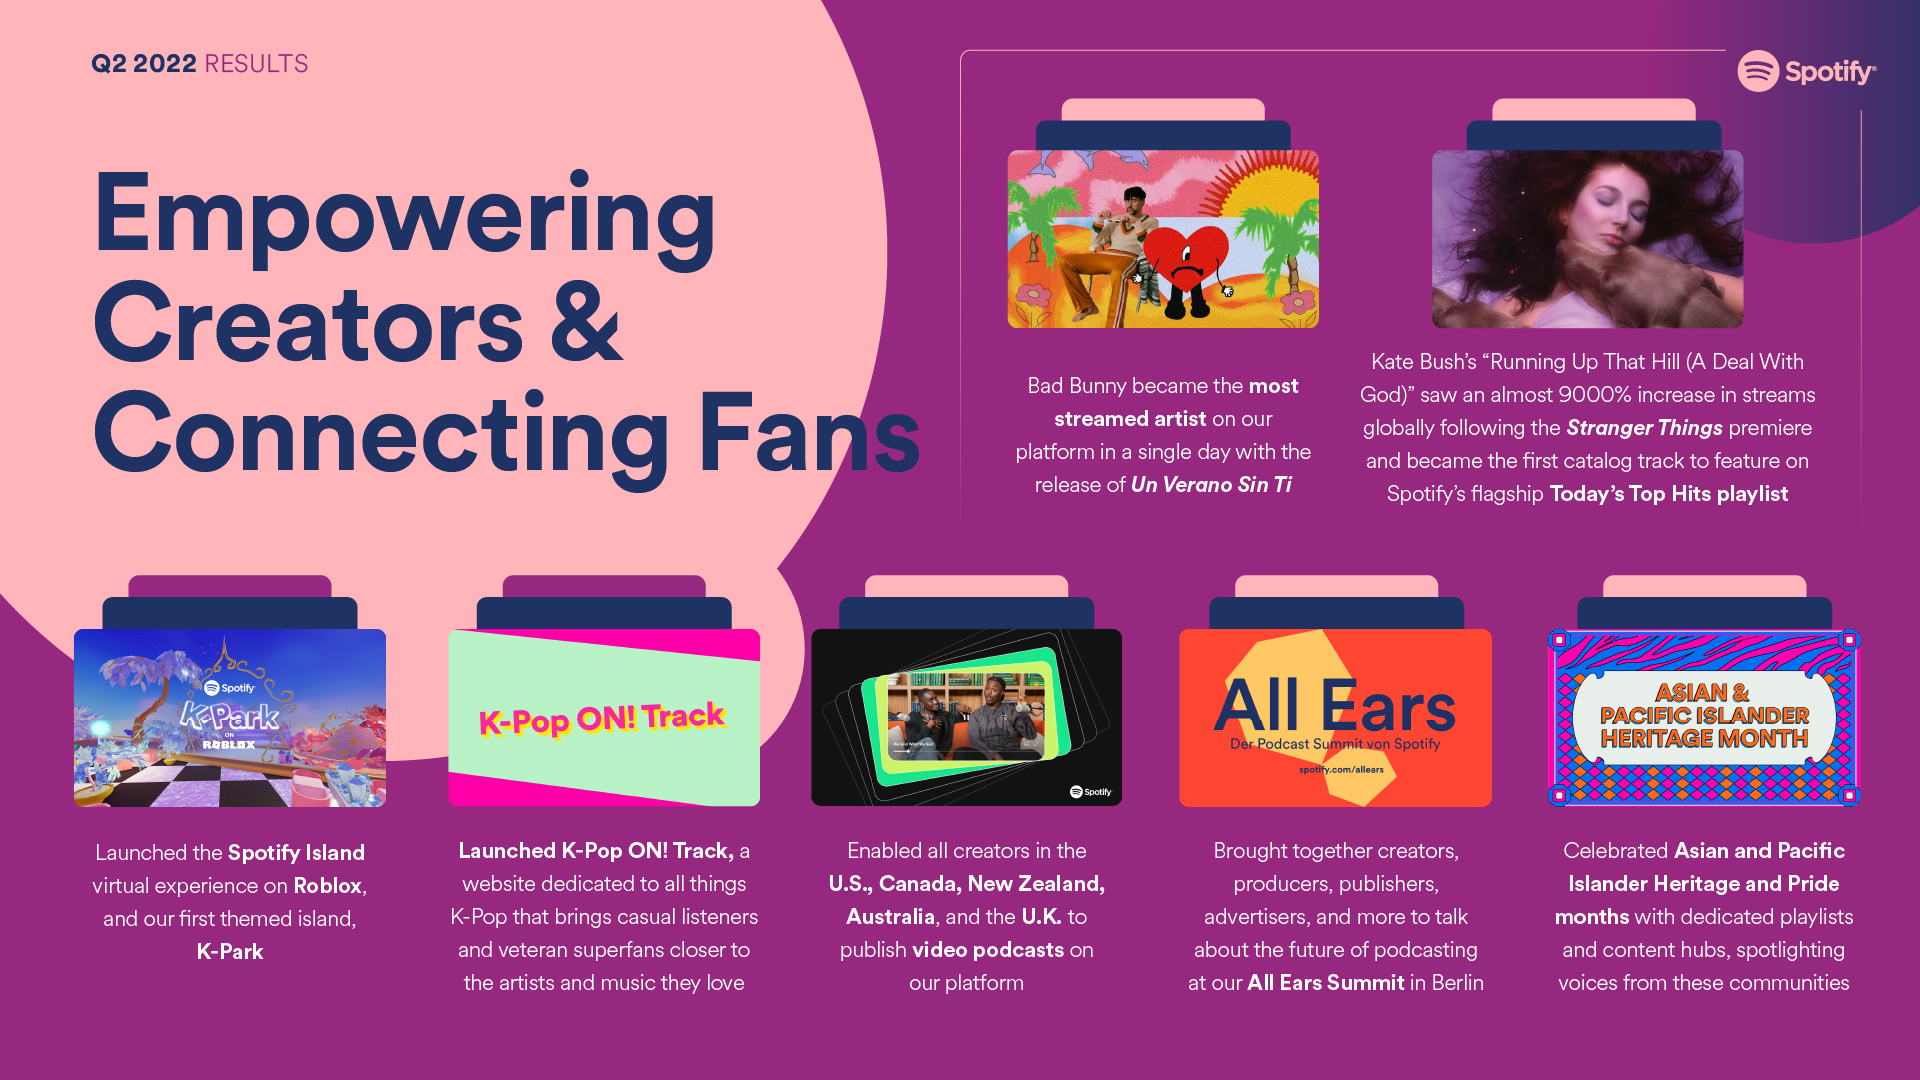 Spotify Empowering Creators & Connecting Fans